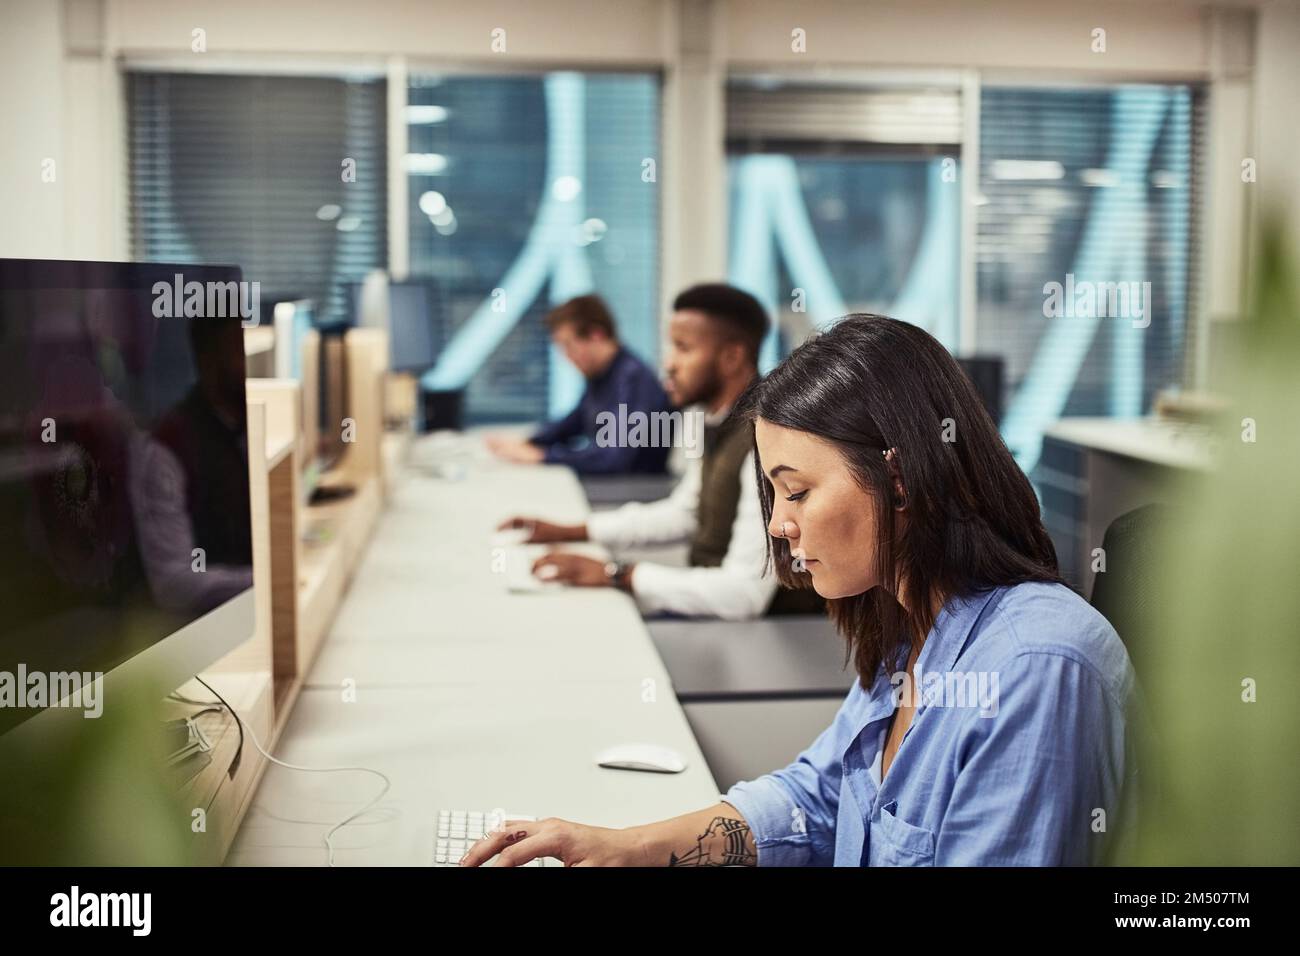 Theyre innovators of the creative world. a group of designers working on computers in an office. Stock Photo